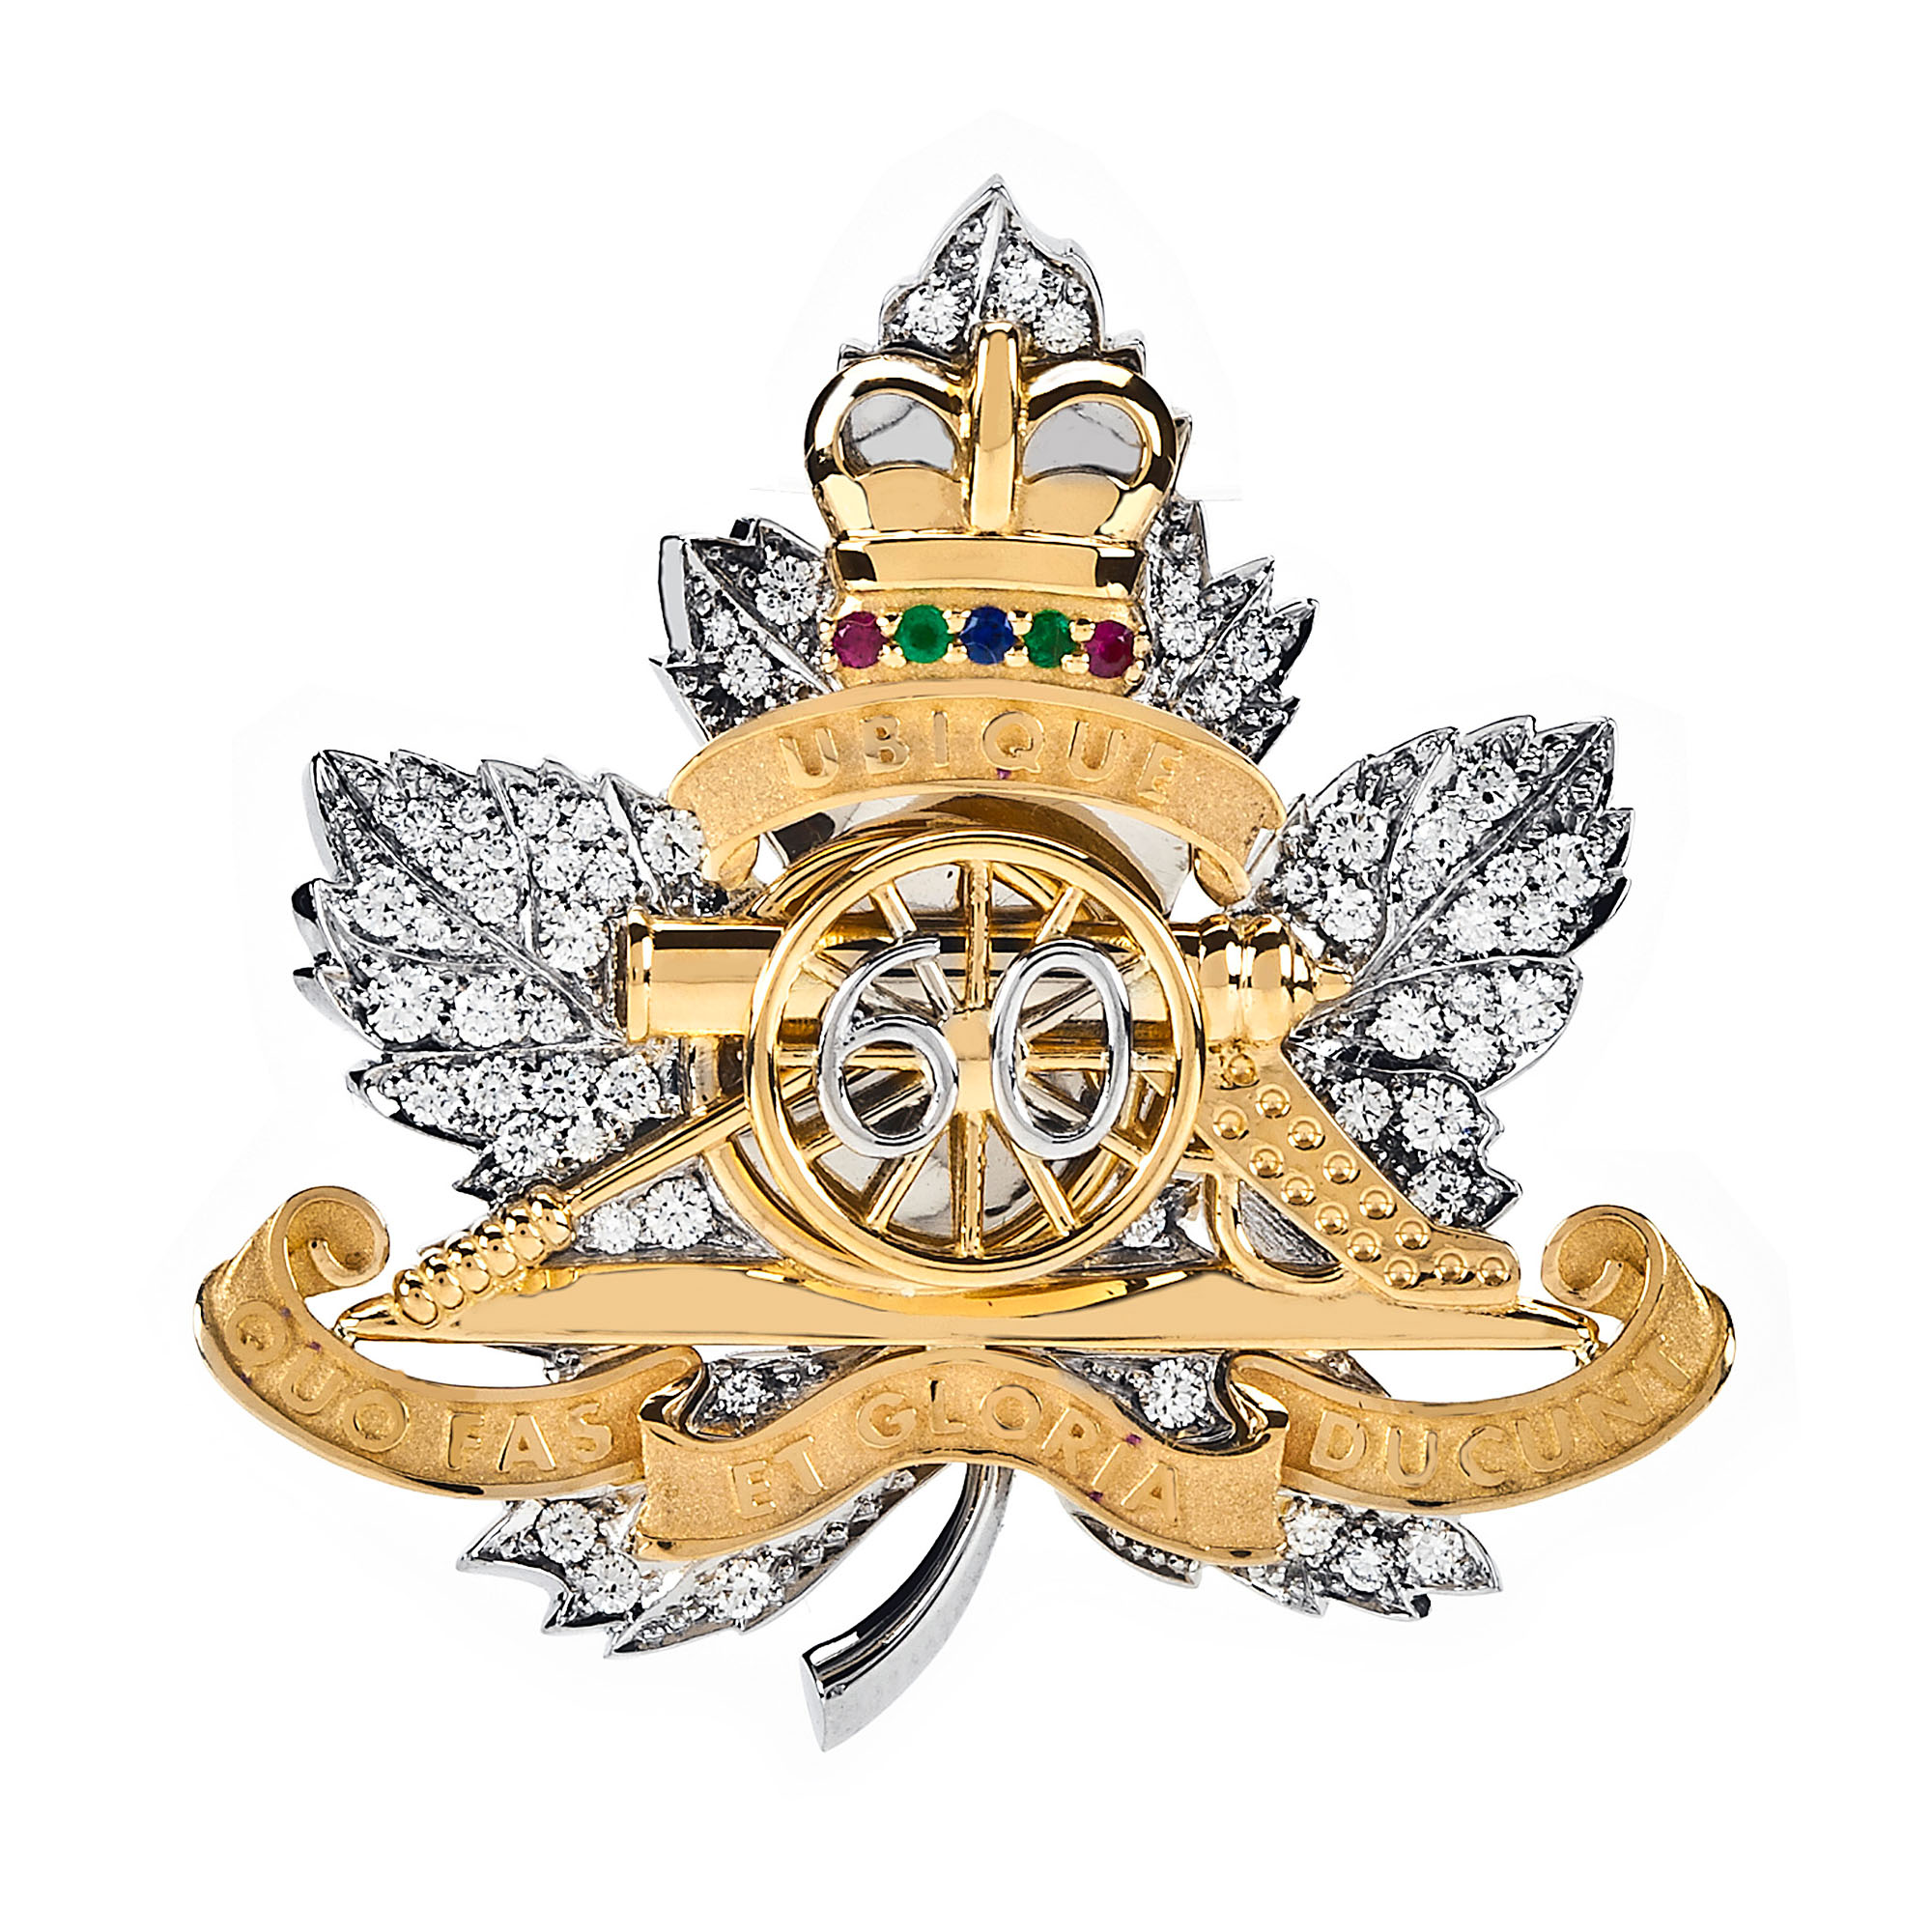 Birks, Canada's leading manufacturer and retailer of fine jewellery, has produced a diamond brooch which has been presented to Her Majesty the Queen, Captain General of the Royal Regiment of Canadian Artillery yesterday, a gift from the Regiment in celebration of her 60th anniversary of service as Captain General. (CNW Group/BIRKS & MAYORS INC.)